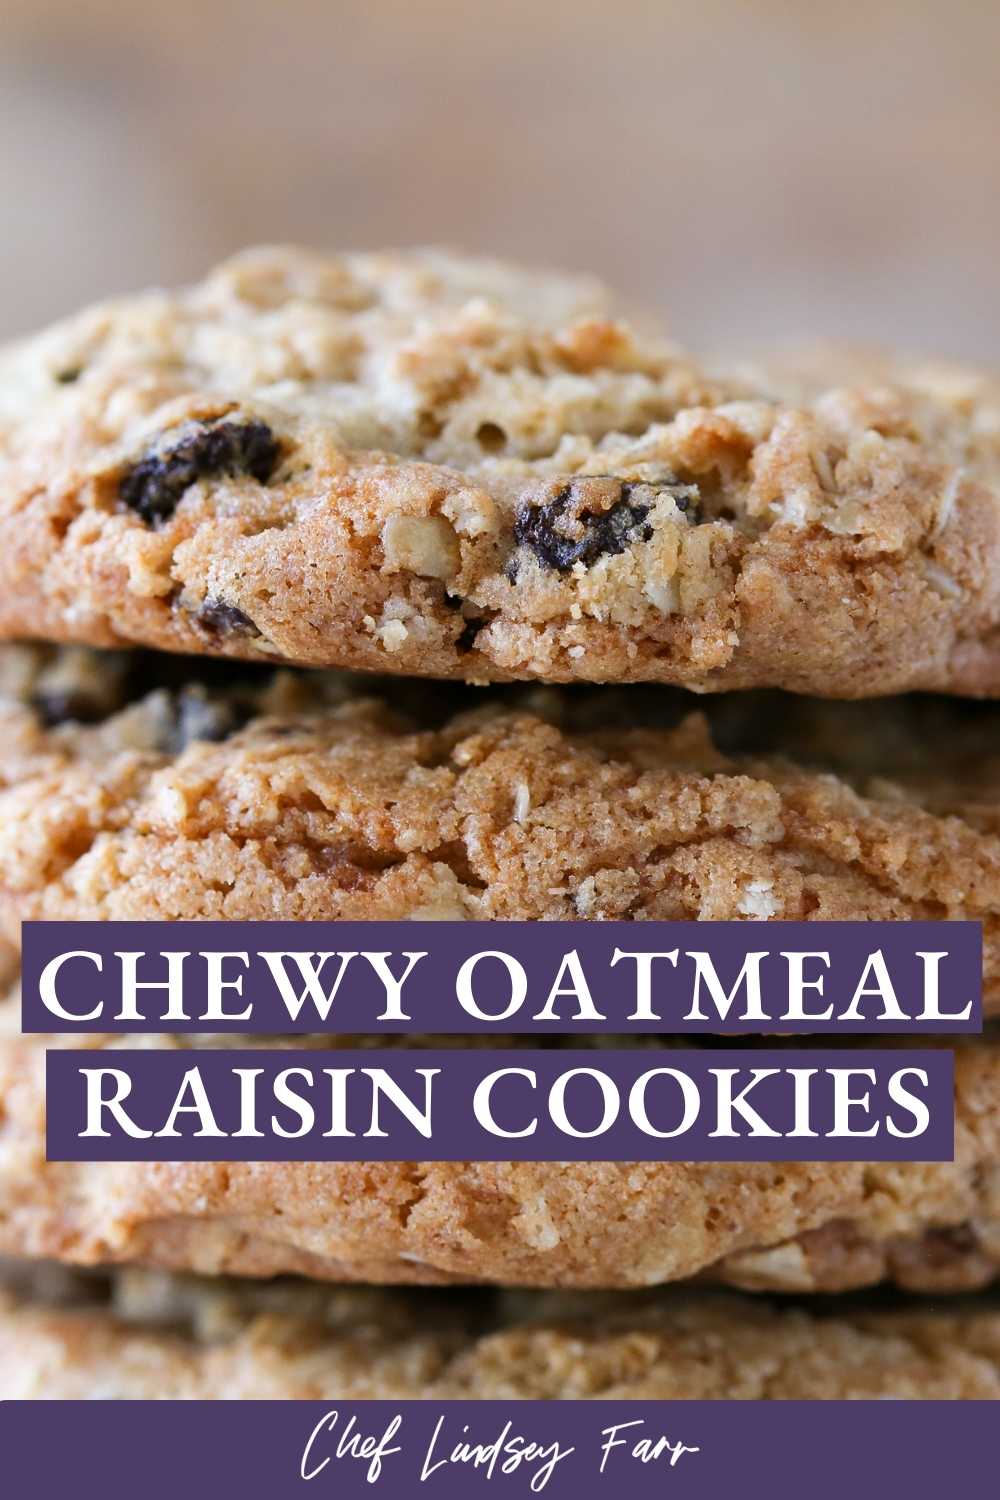 Perfectly baked golden oatmeal raisin cookies.